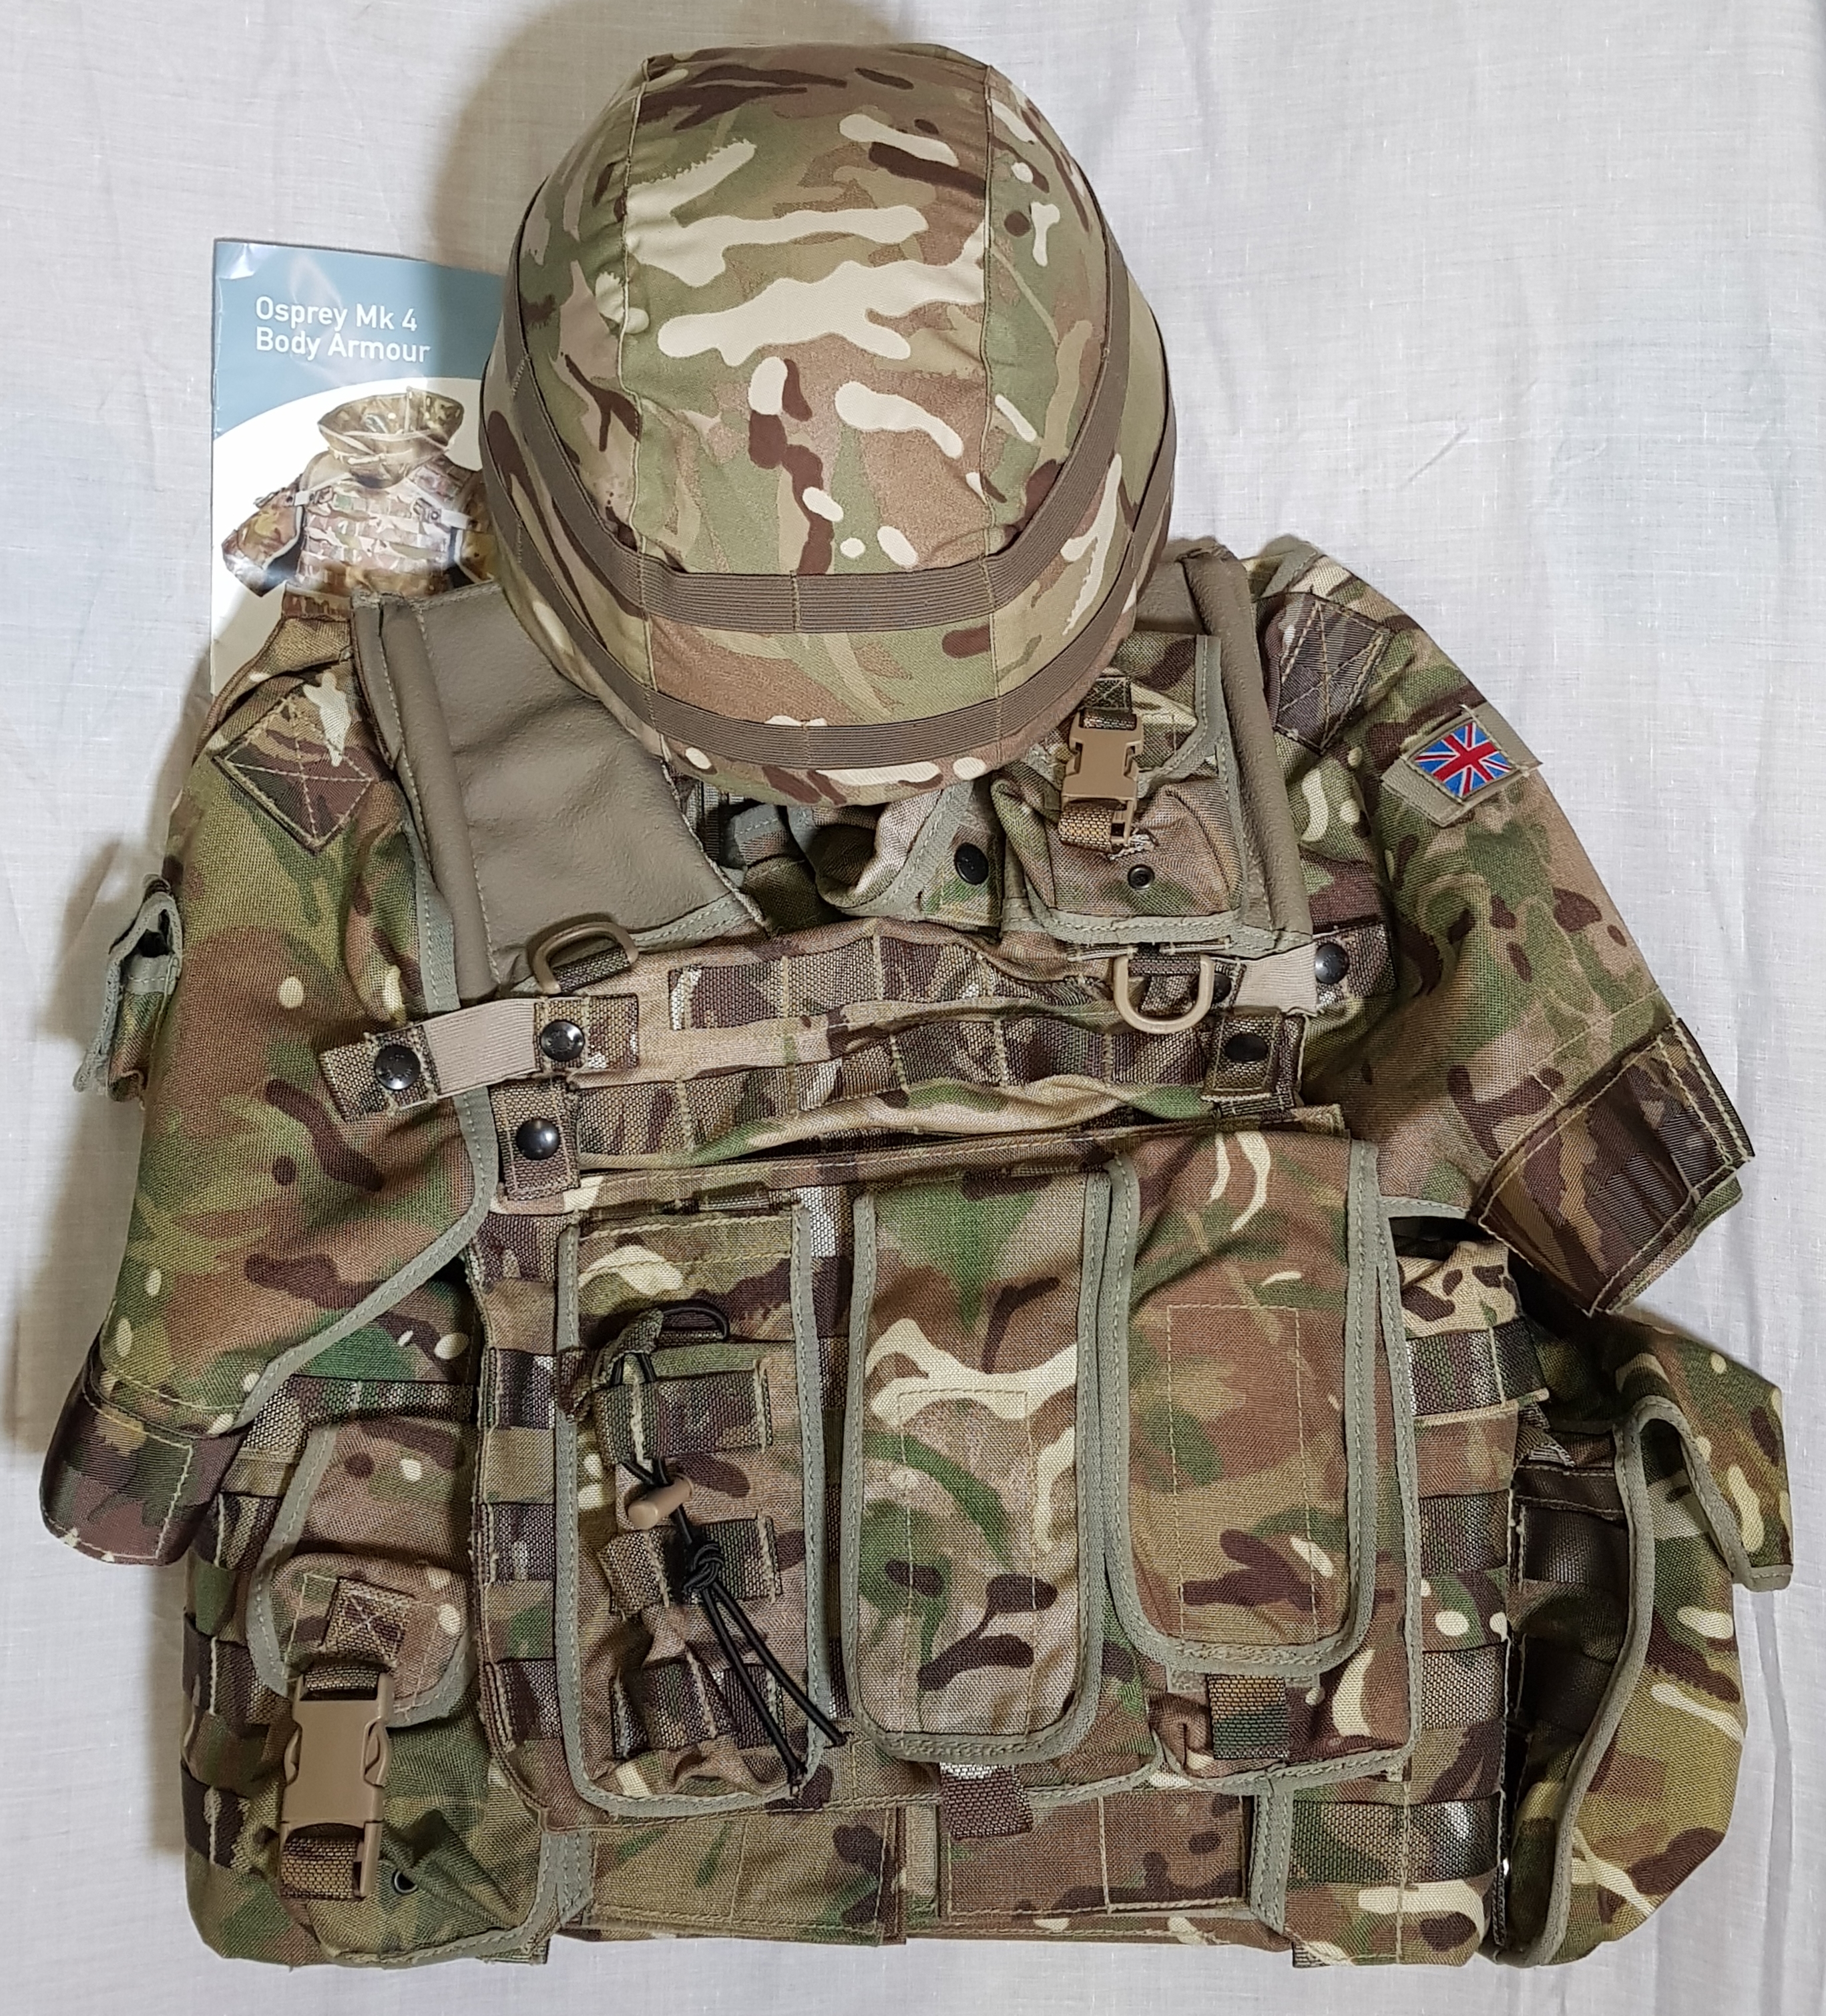 BRITISH ARMY AFGHANISTAN ISSUE MTP OSPREY MKIV FULL BODY ARMOUR WITH POUCHES, FILLER, 2 BALLISTIC